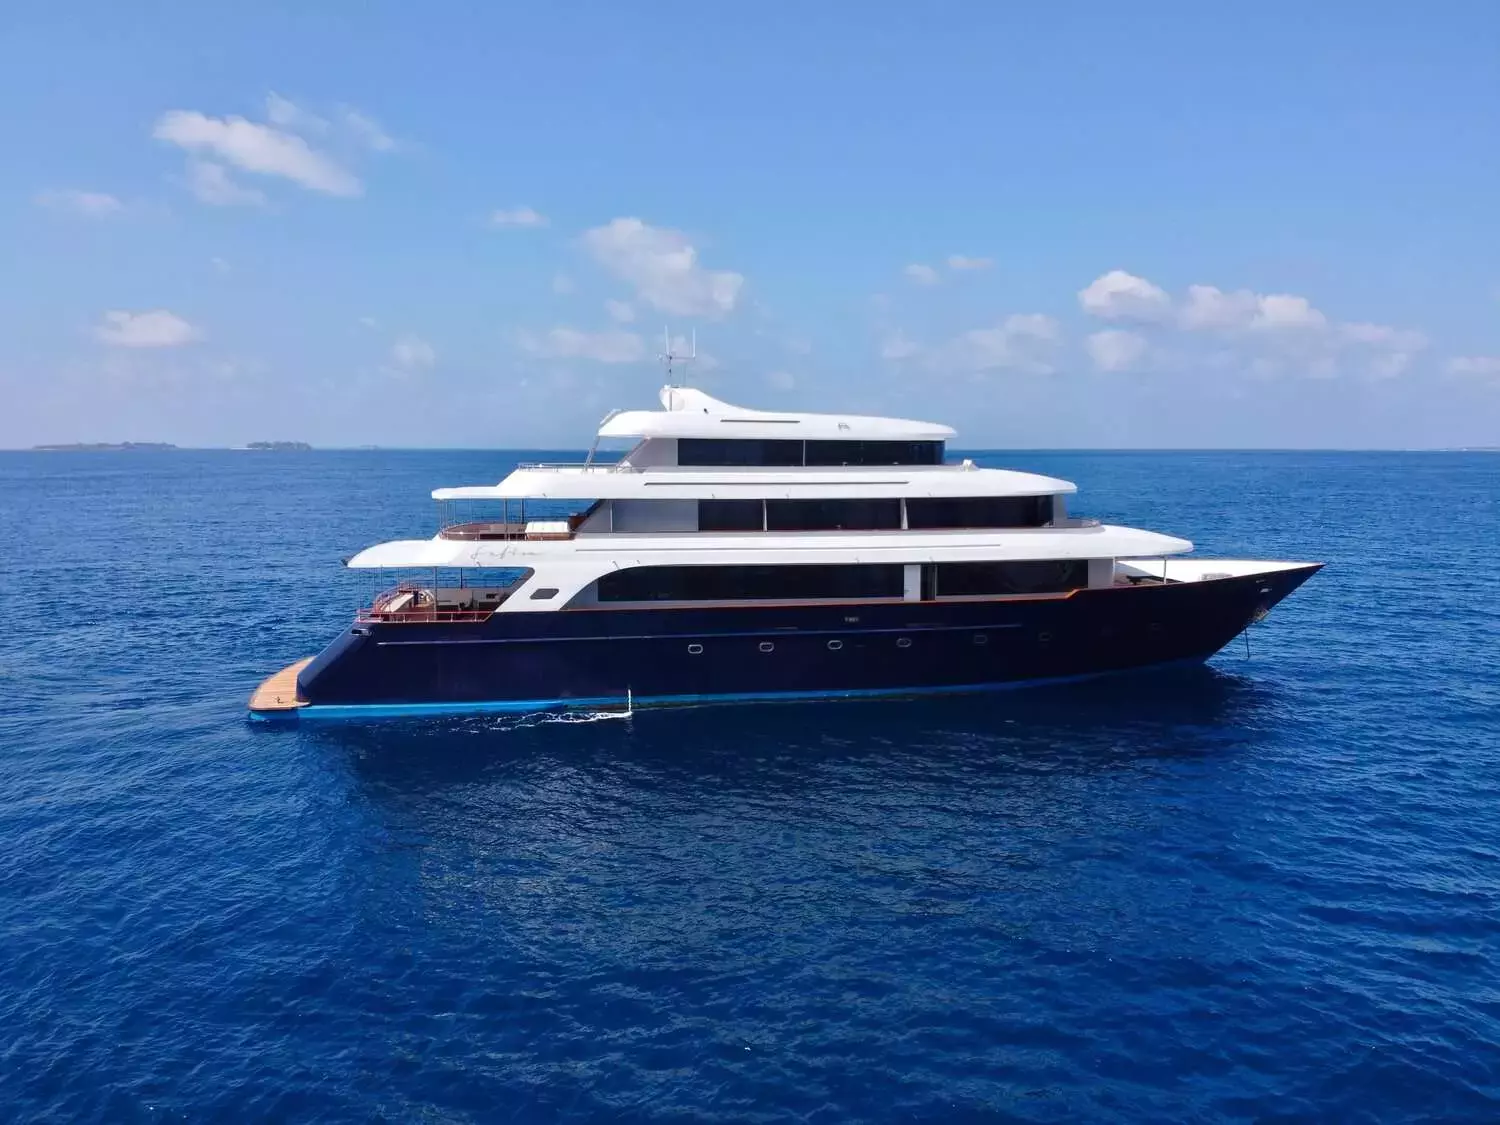 Safira by Custom Made - Top rates for a Charter of a private Superyacht in Madagascar